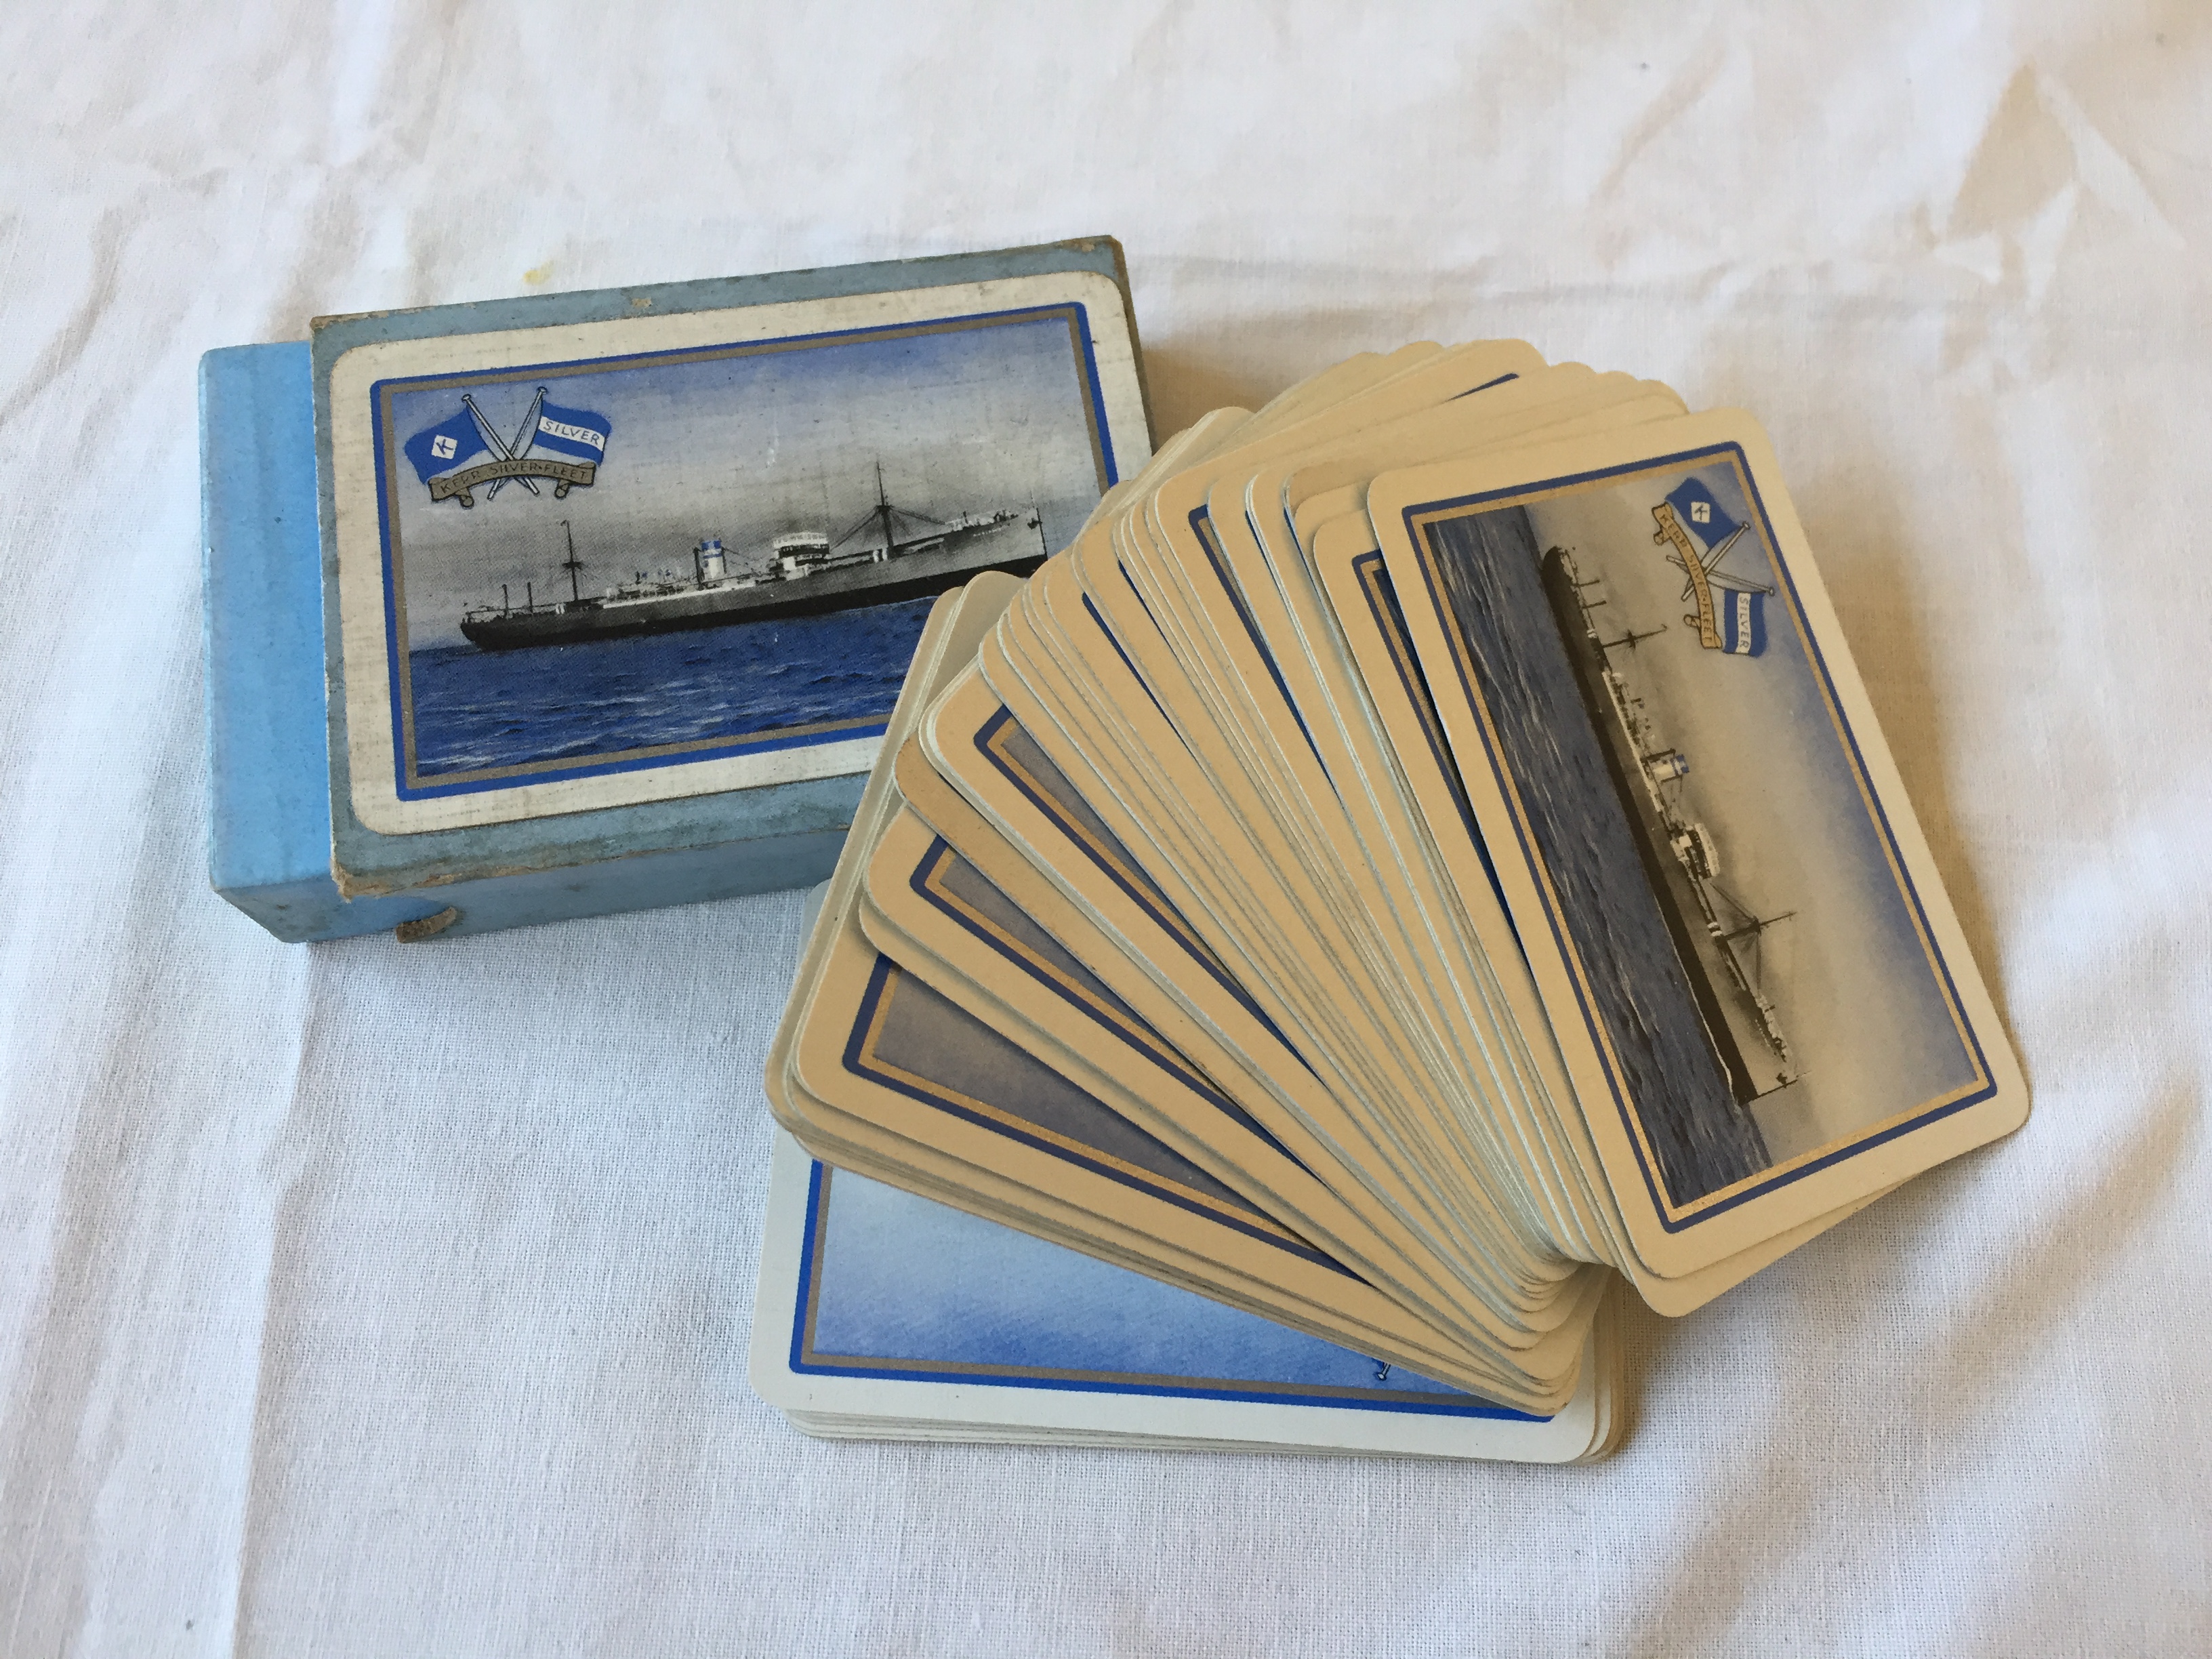 SET OF VERY EARLY PLAYING CARDS FROM THE KERR-SILVER FLEET SHIPPING COMPANY